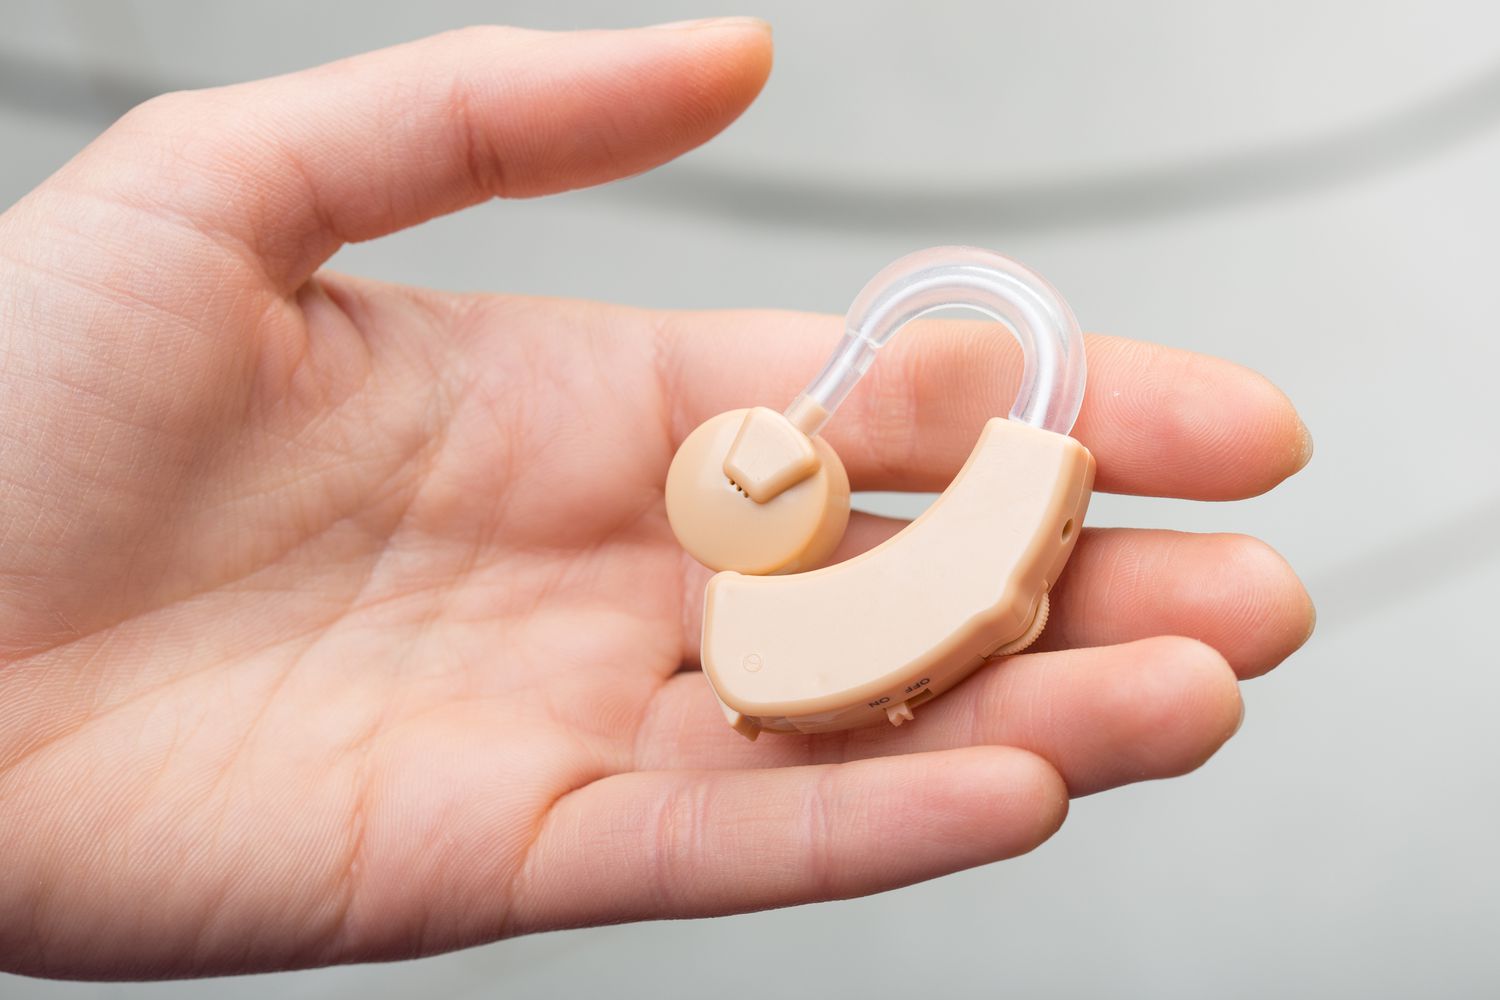 What features should I look for in a modern hearing aid?